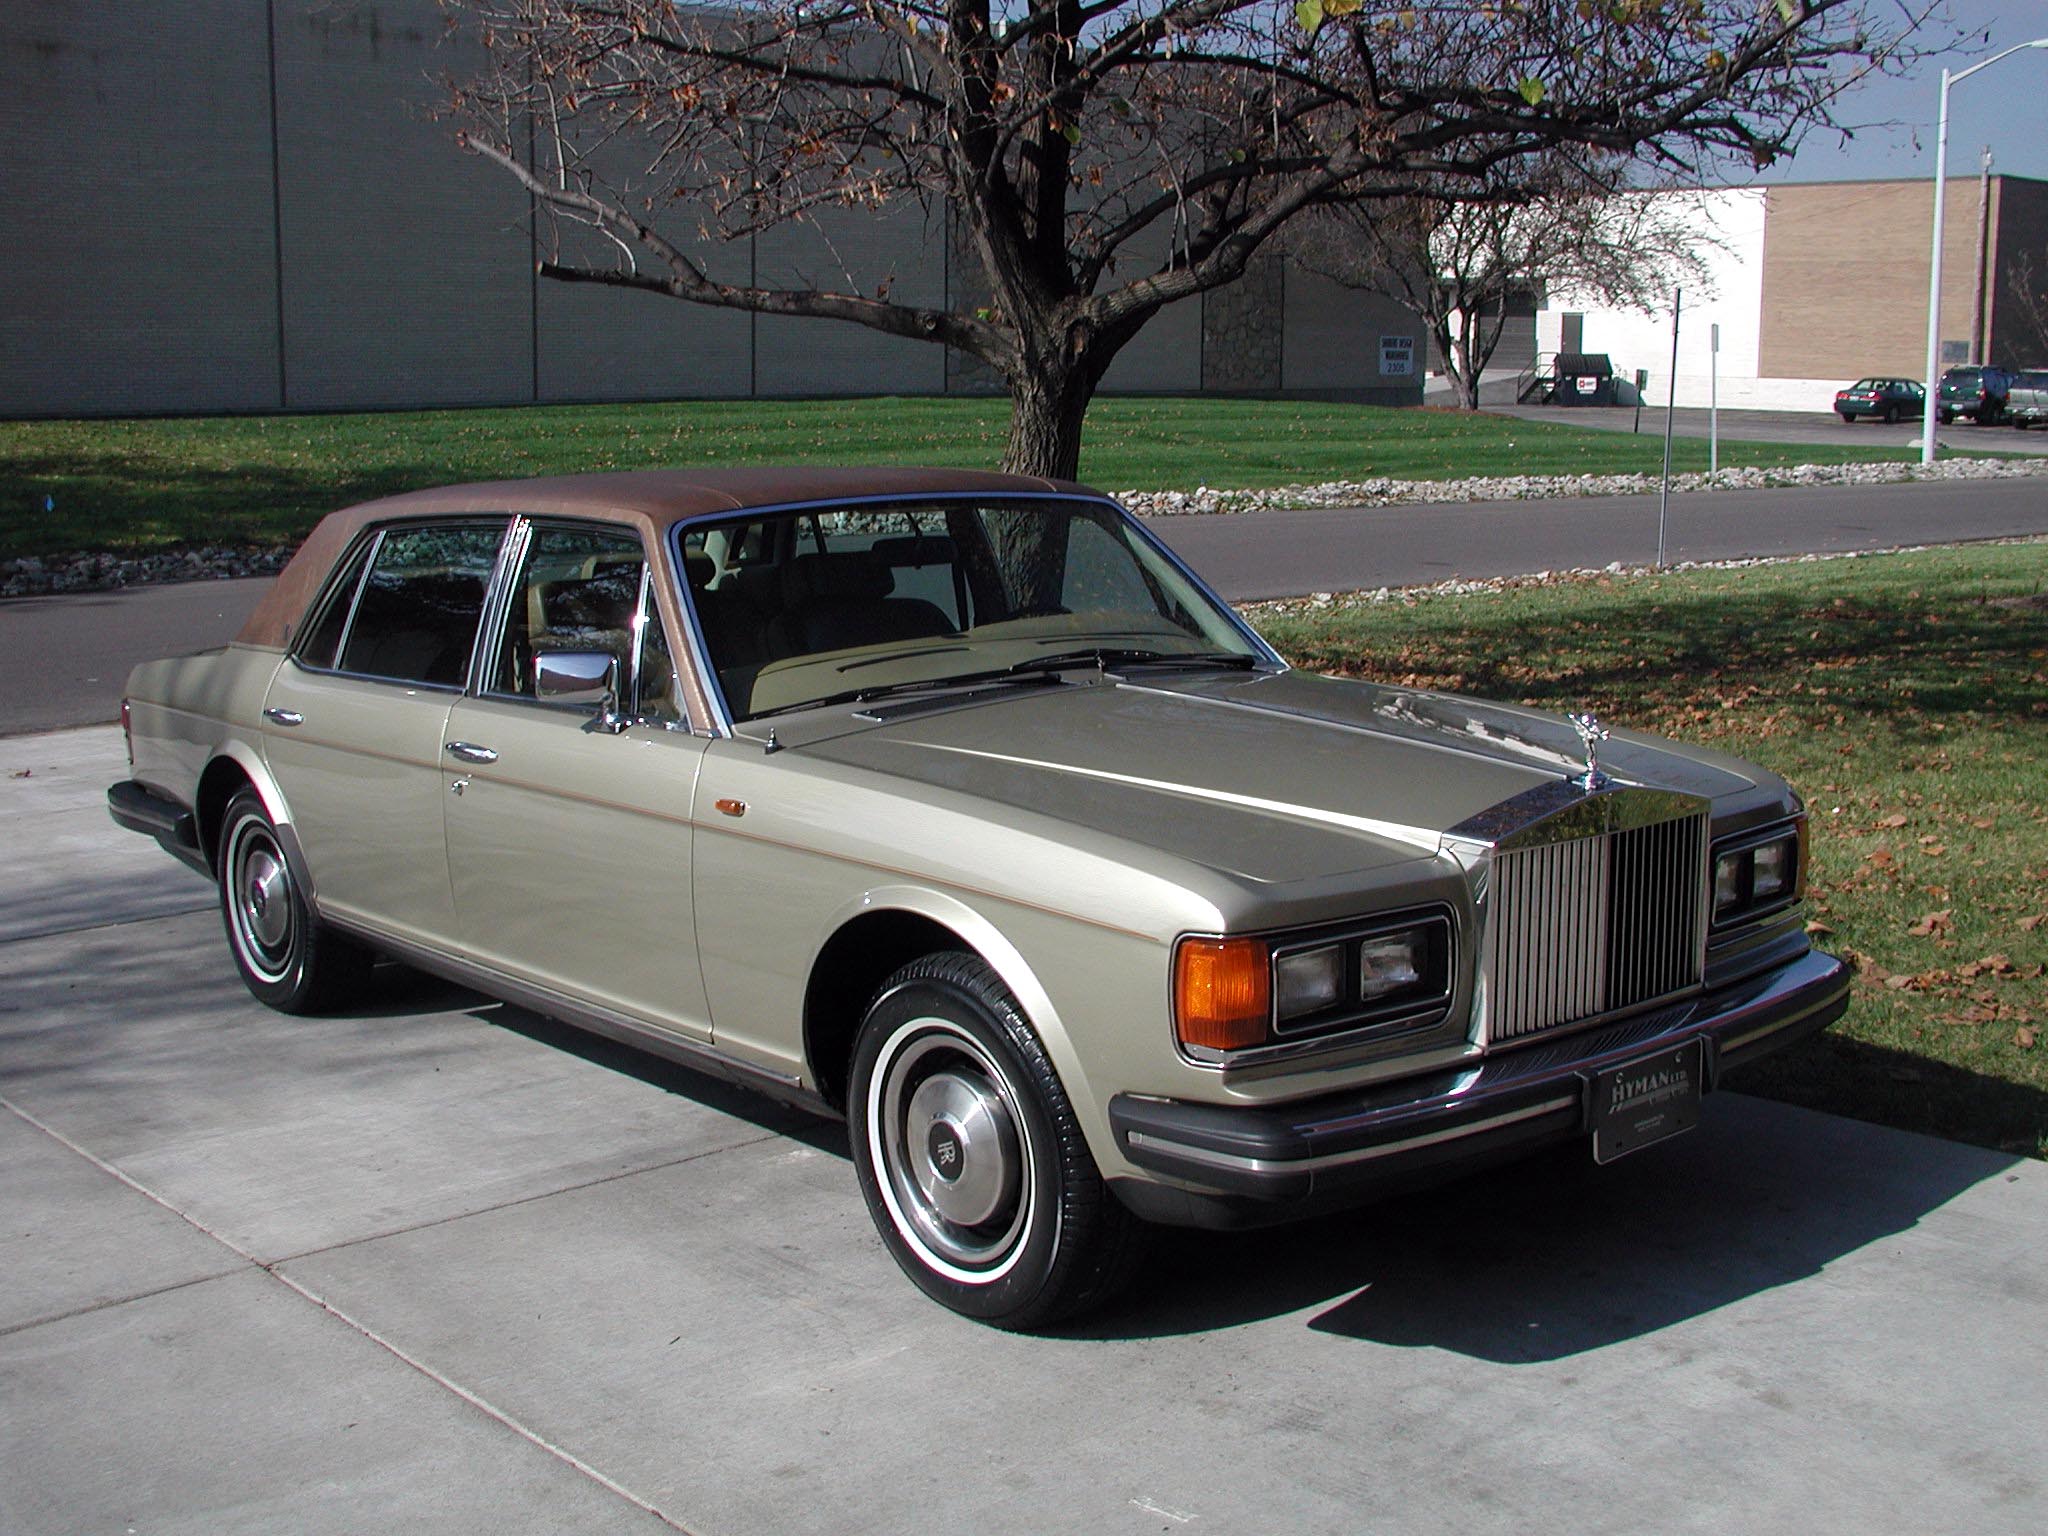 Used RollsRoyce Silver Spur for Sale Test Drive at Home  Kelley Blue  Book